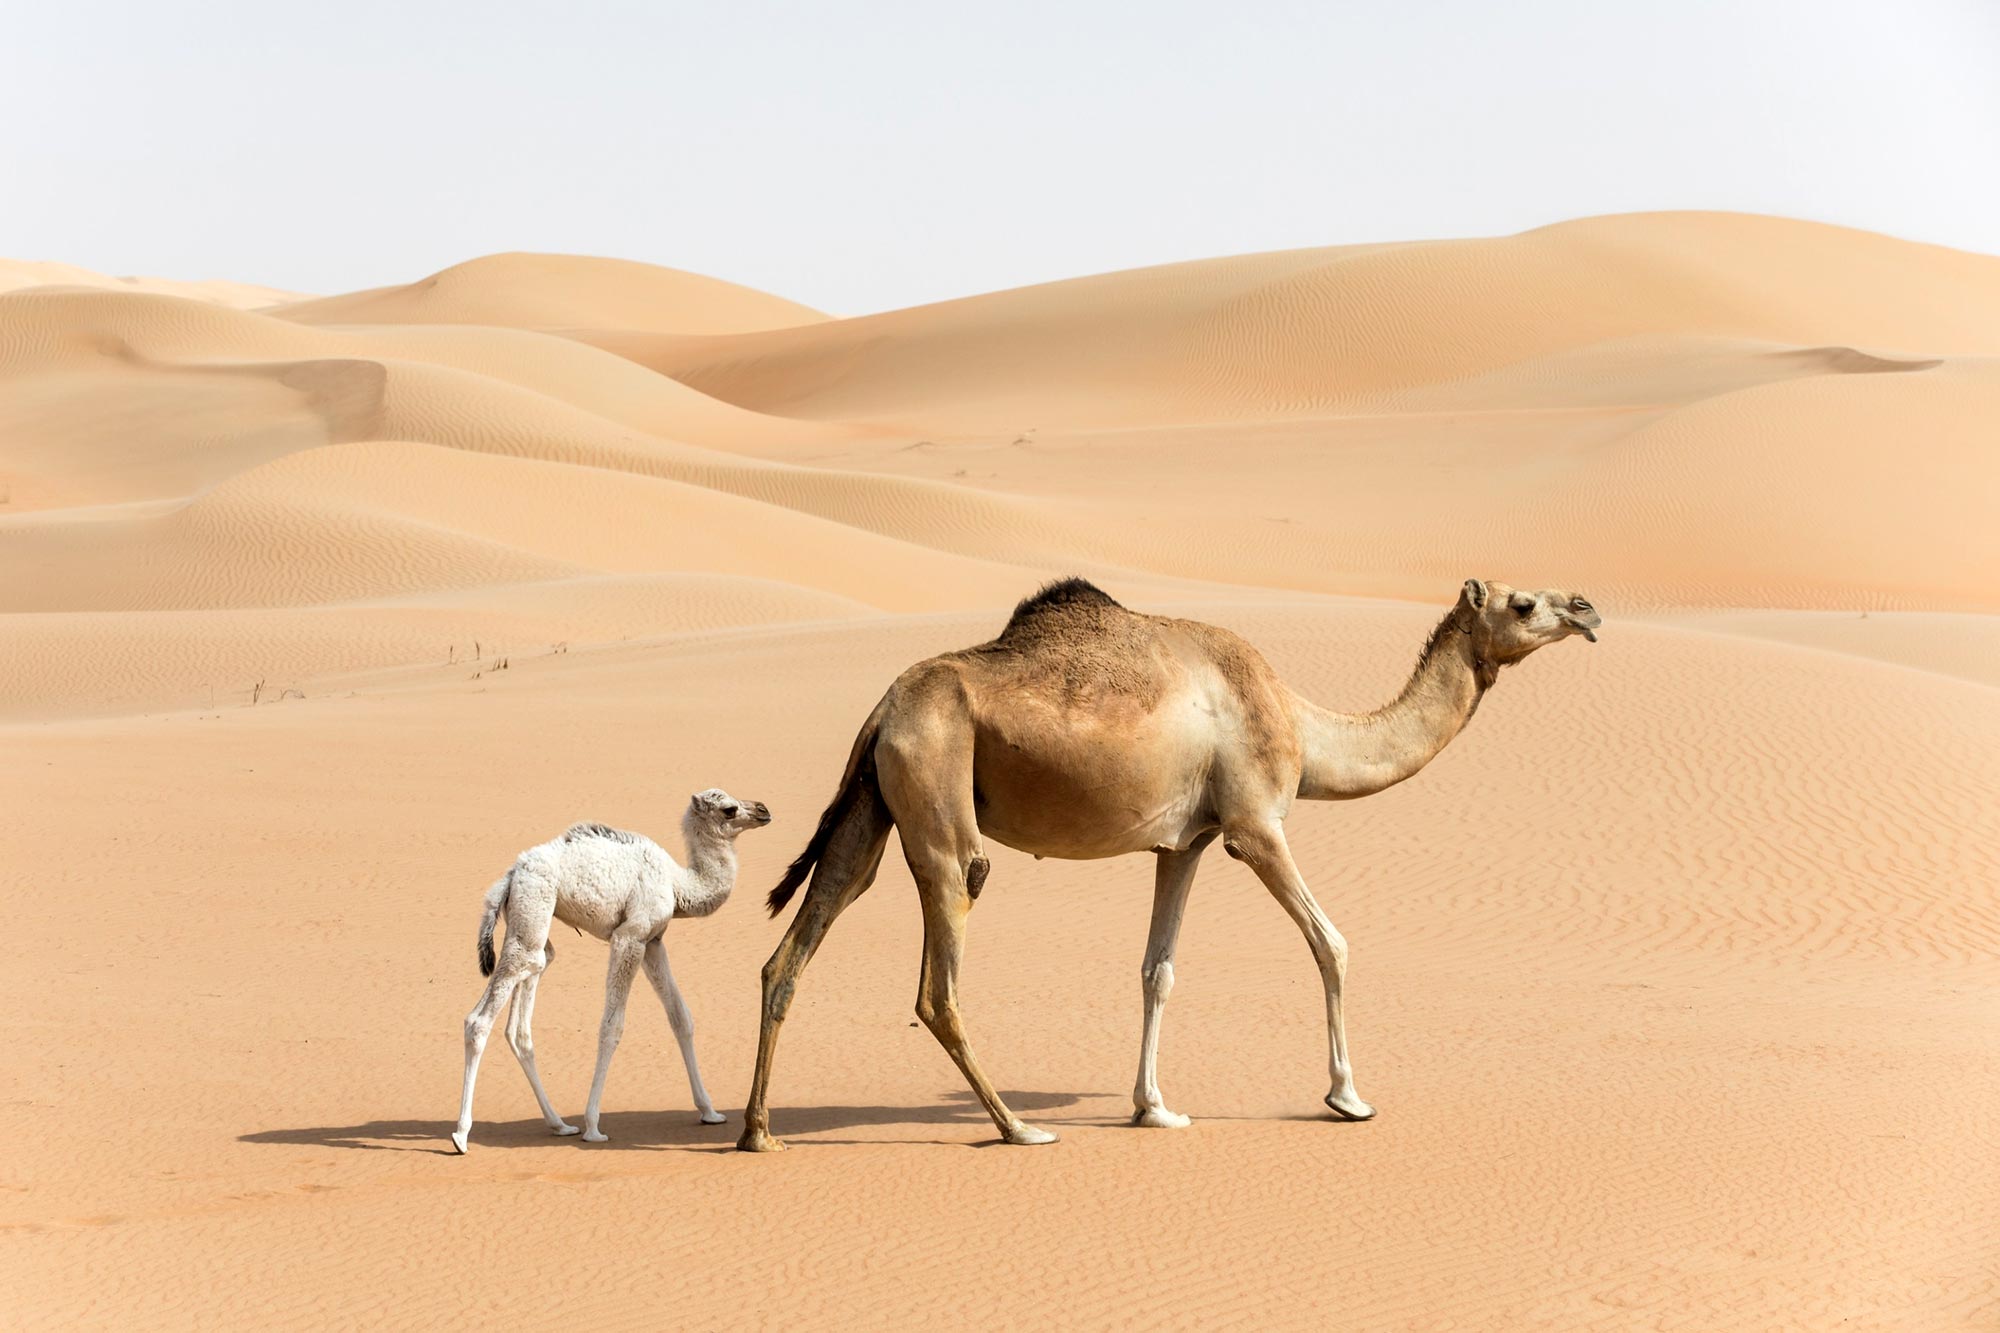 Camel Camel Facts: